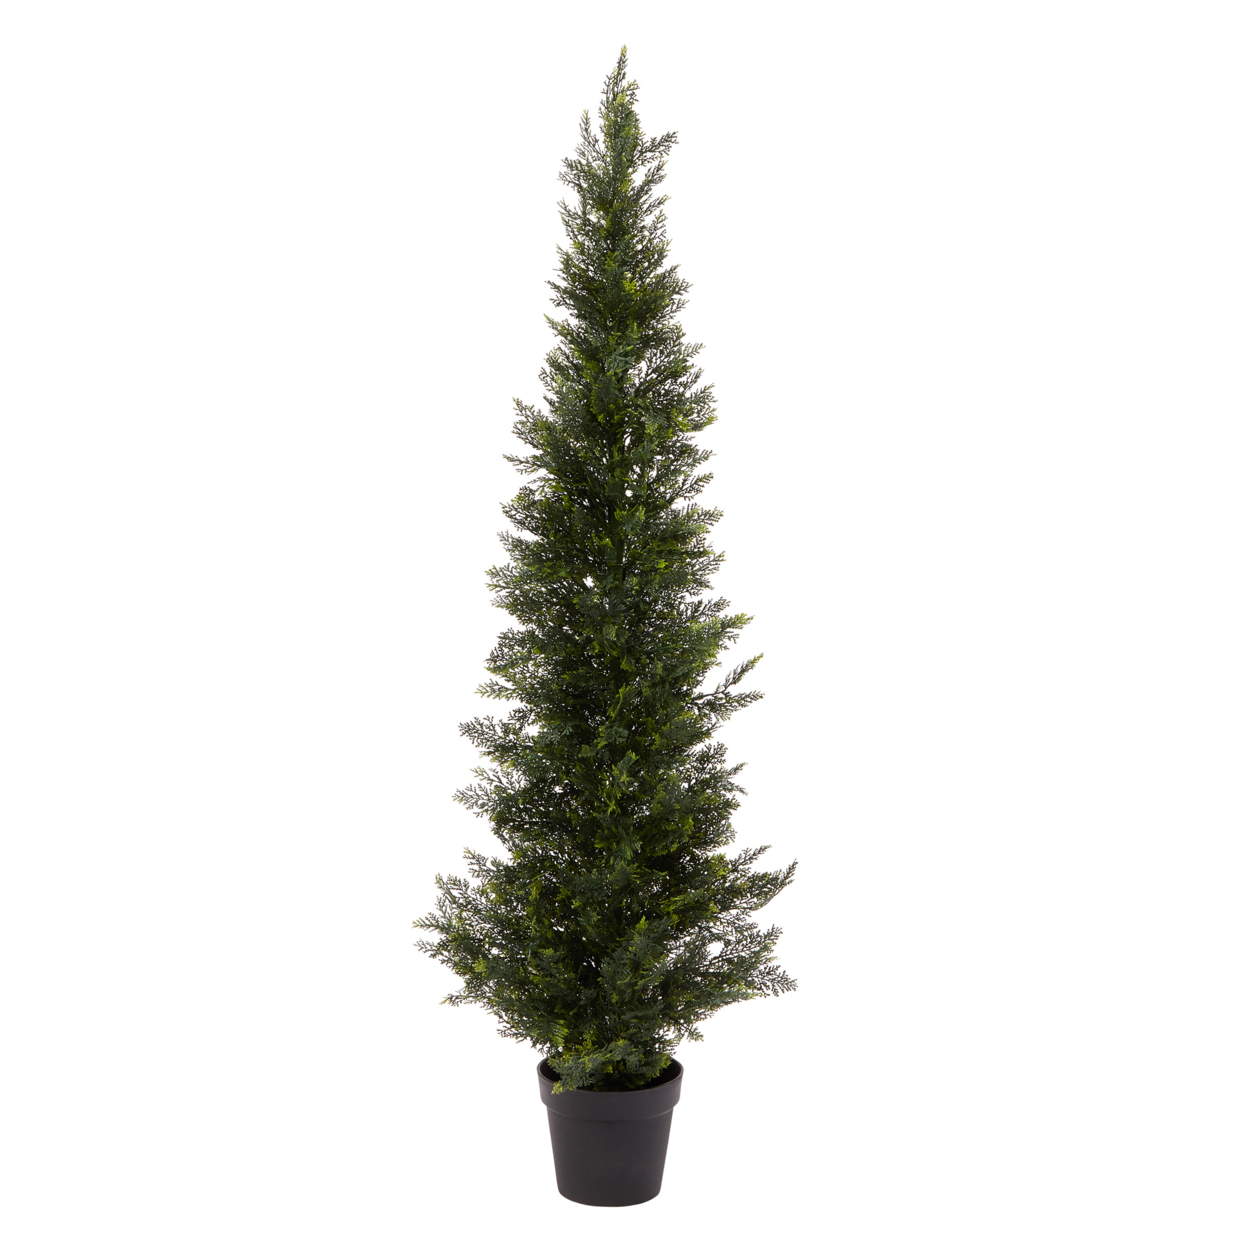 5-Foot-Tall Artificial Cedar Topiary Trees- Potted Indoor Or Outdoor UV Protection Plastic Tree In Pot